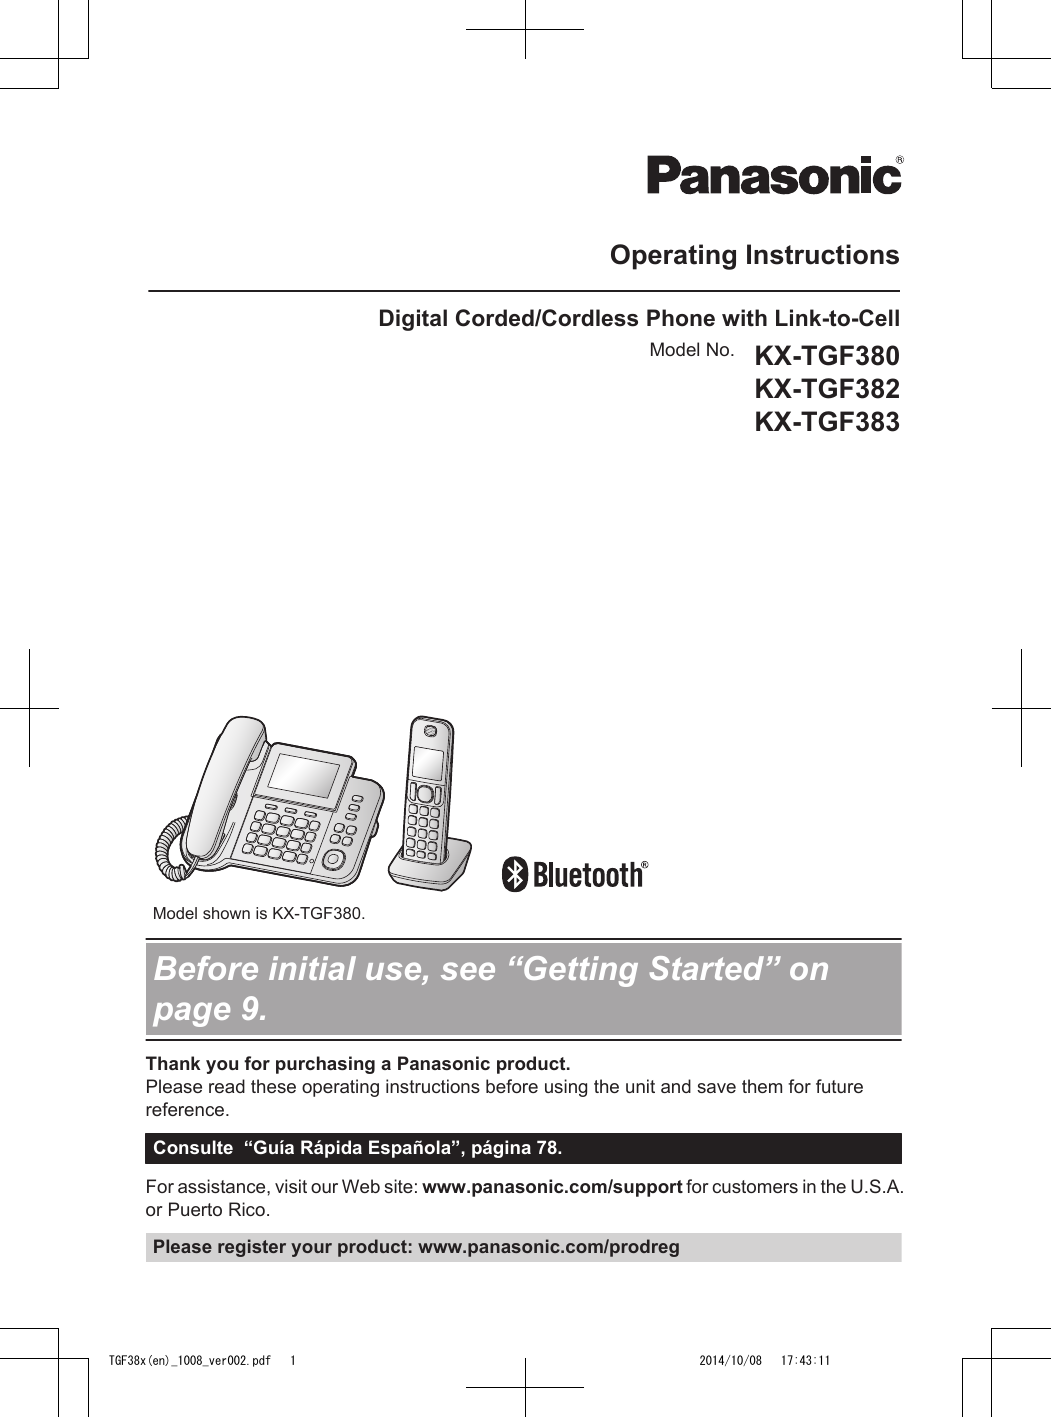 Operating InstructionsDigital Corded/Cordless Phone with Link-to-CellModel No. KX-TGF380KX-TGF382KX-TGF383          Model shown is KX-TGF380.Before initial use, see “Getting Started” onpage 9.Thank you for purchasing a Panasonic product.Please read these operating instructions before using the unit and save them for futurereference.Consulte  “Guía Rápida Española”, página 78.For assistance, visit our Web site: www.panasonic.com/support for customers in the U.S.A.or Puerto Rico.Please register your product: www.panasonic.com/prodregTGF38x(en)_1008_ver002.pdf   1 2014/10/08   17:43:11